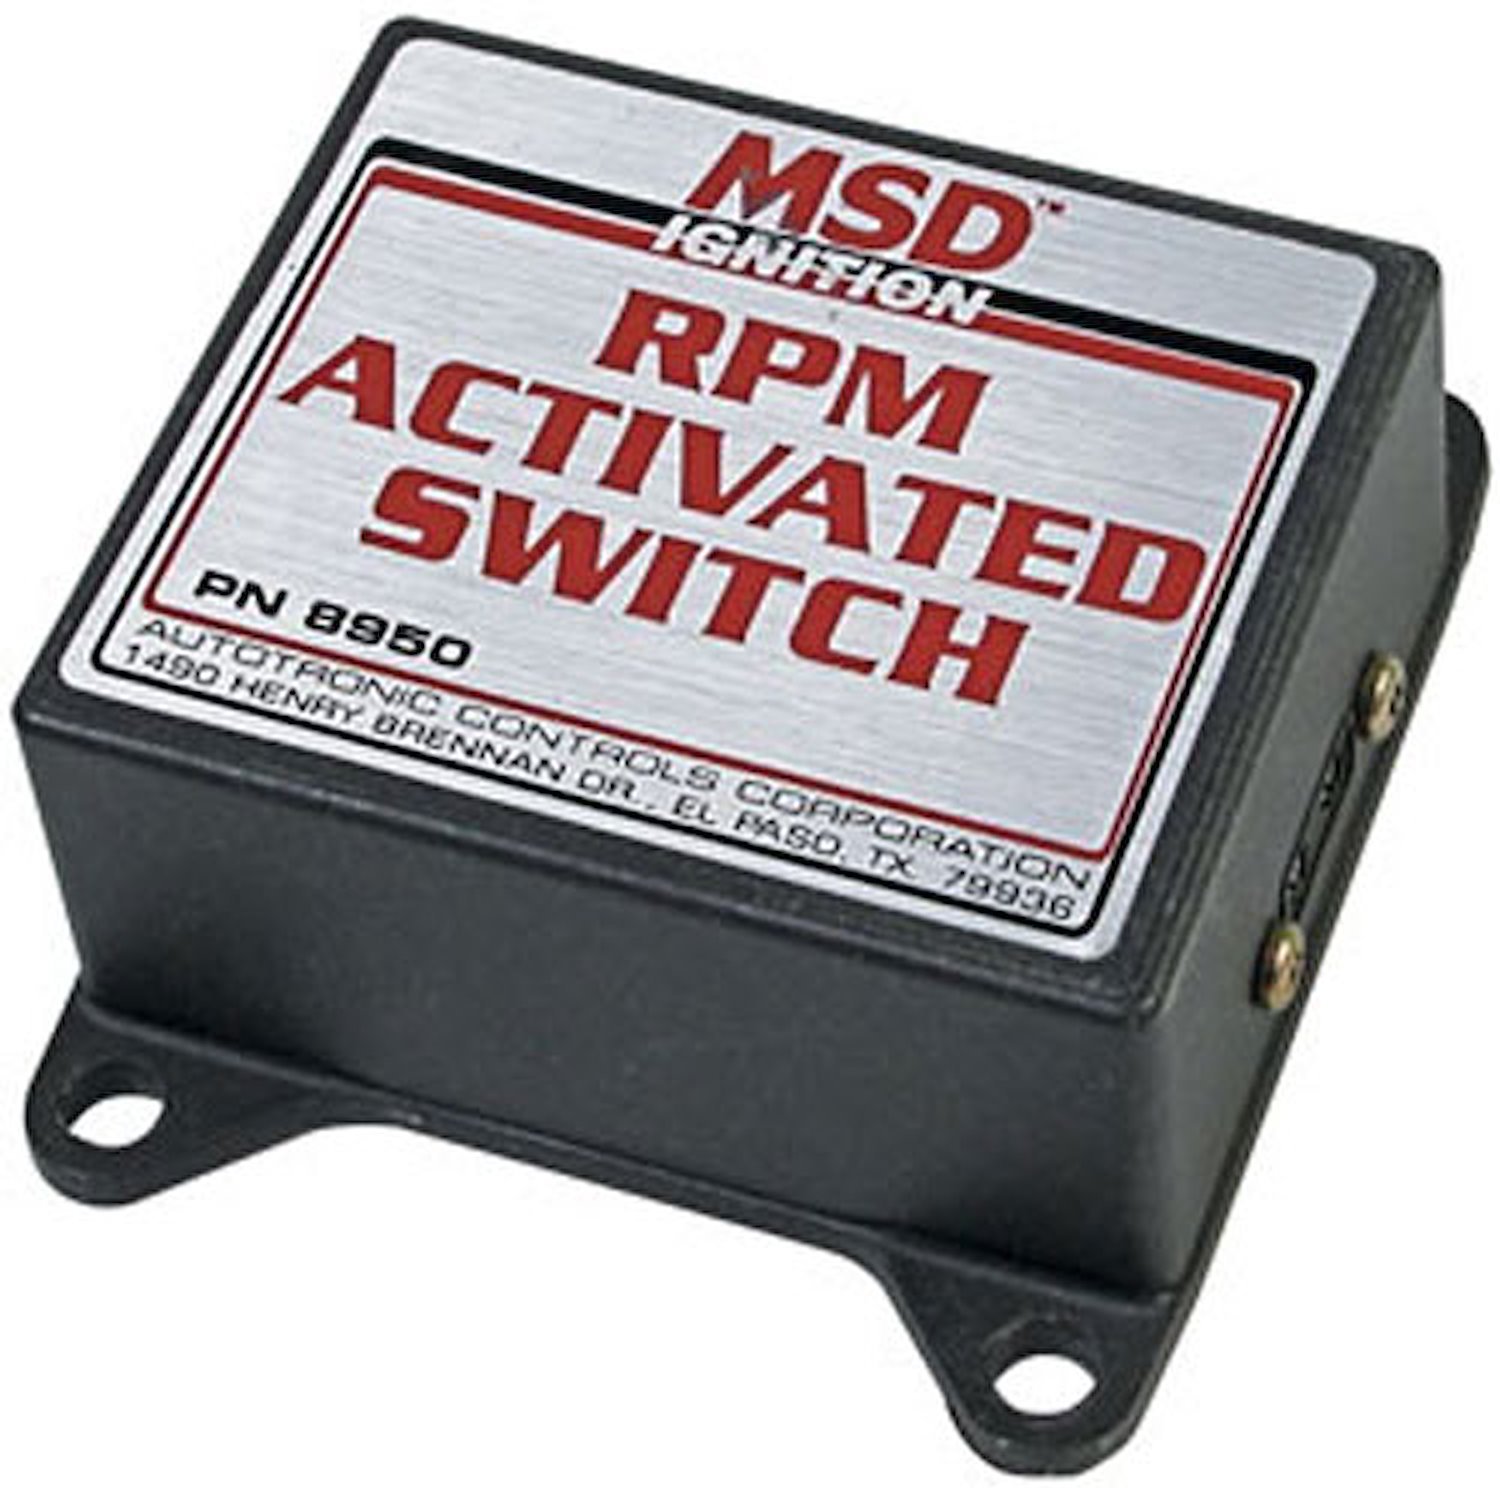 8950 RPM Activated Switch [1.5 Amps]